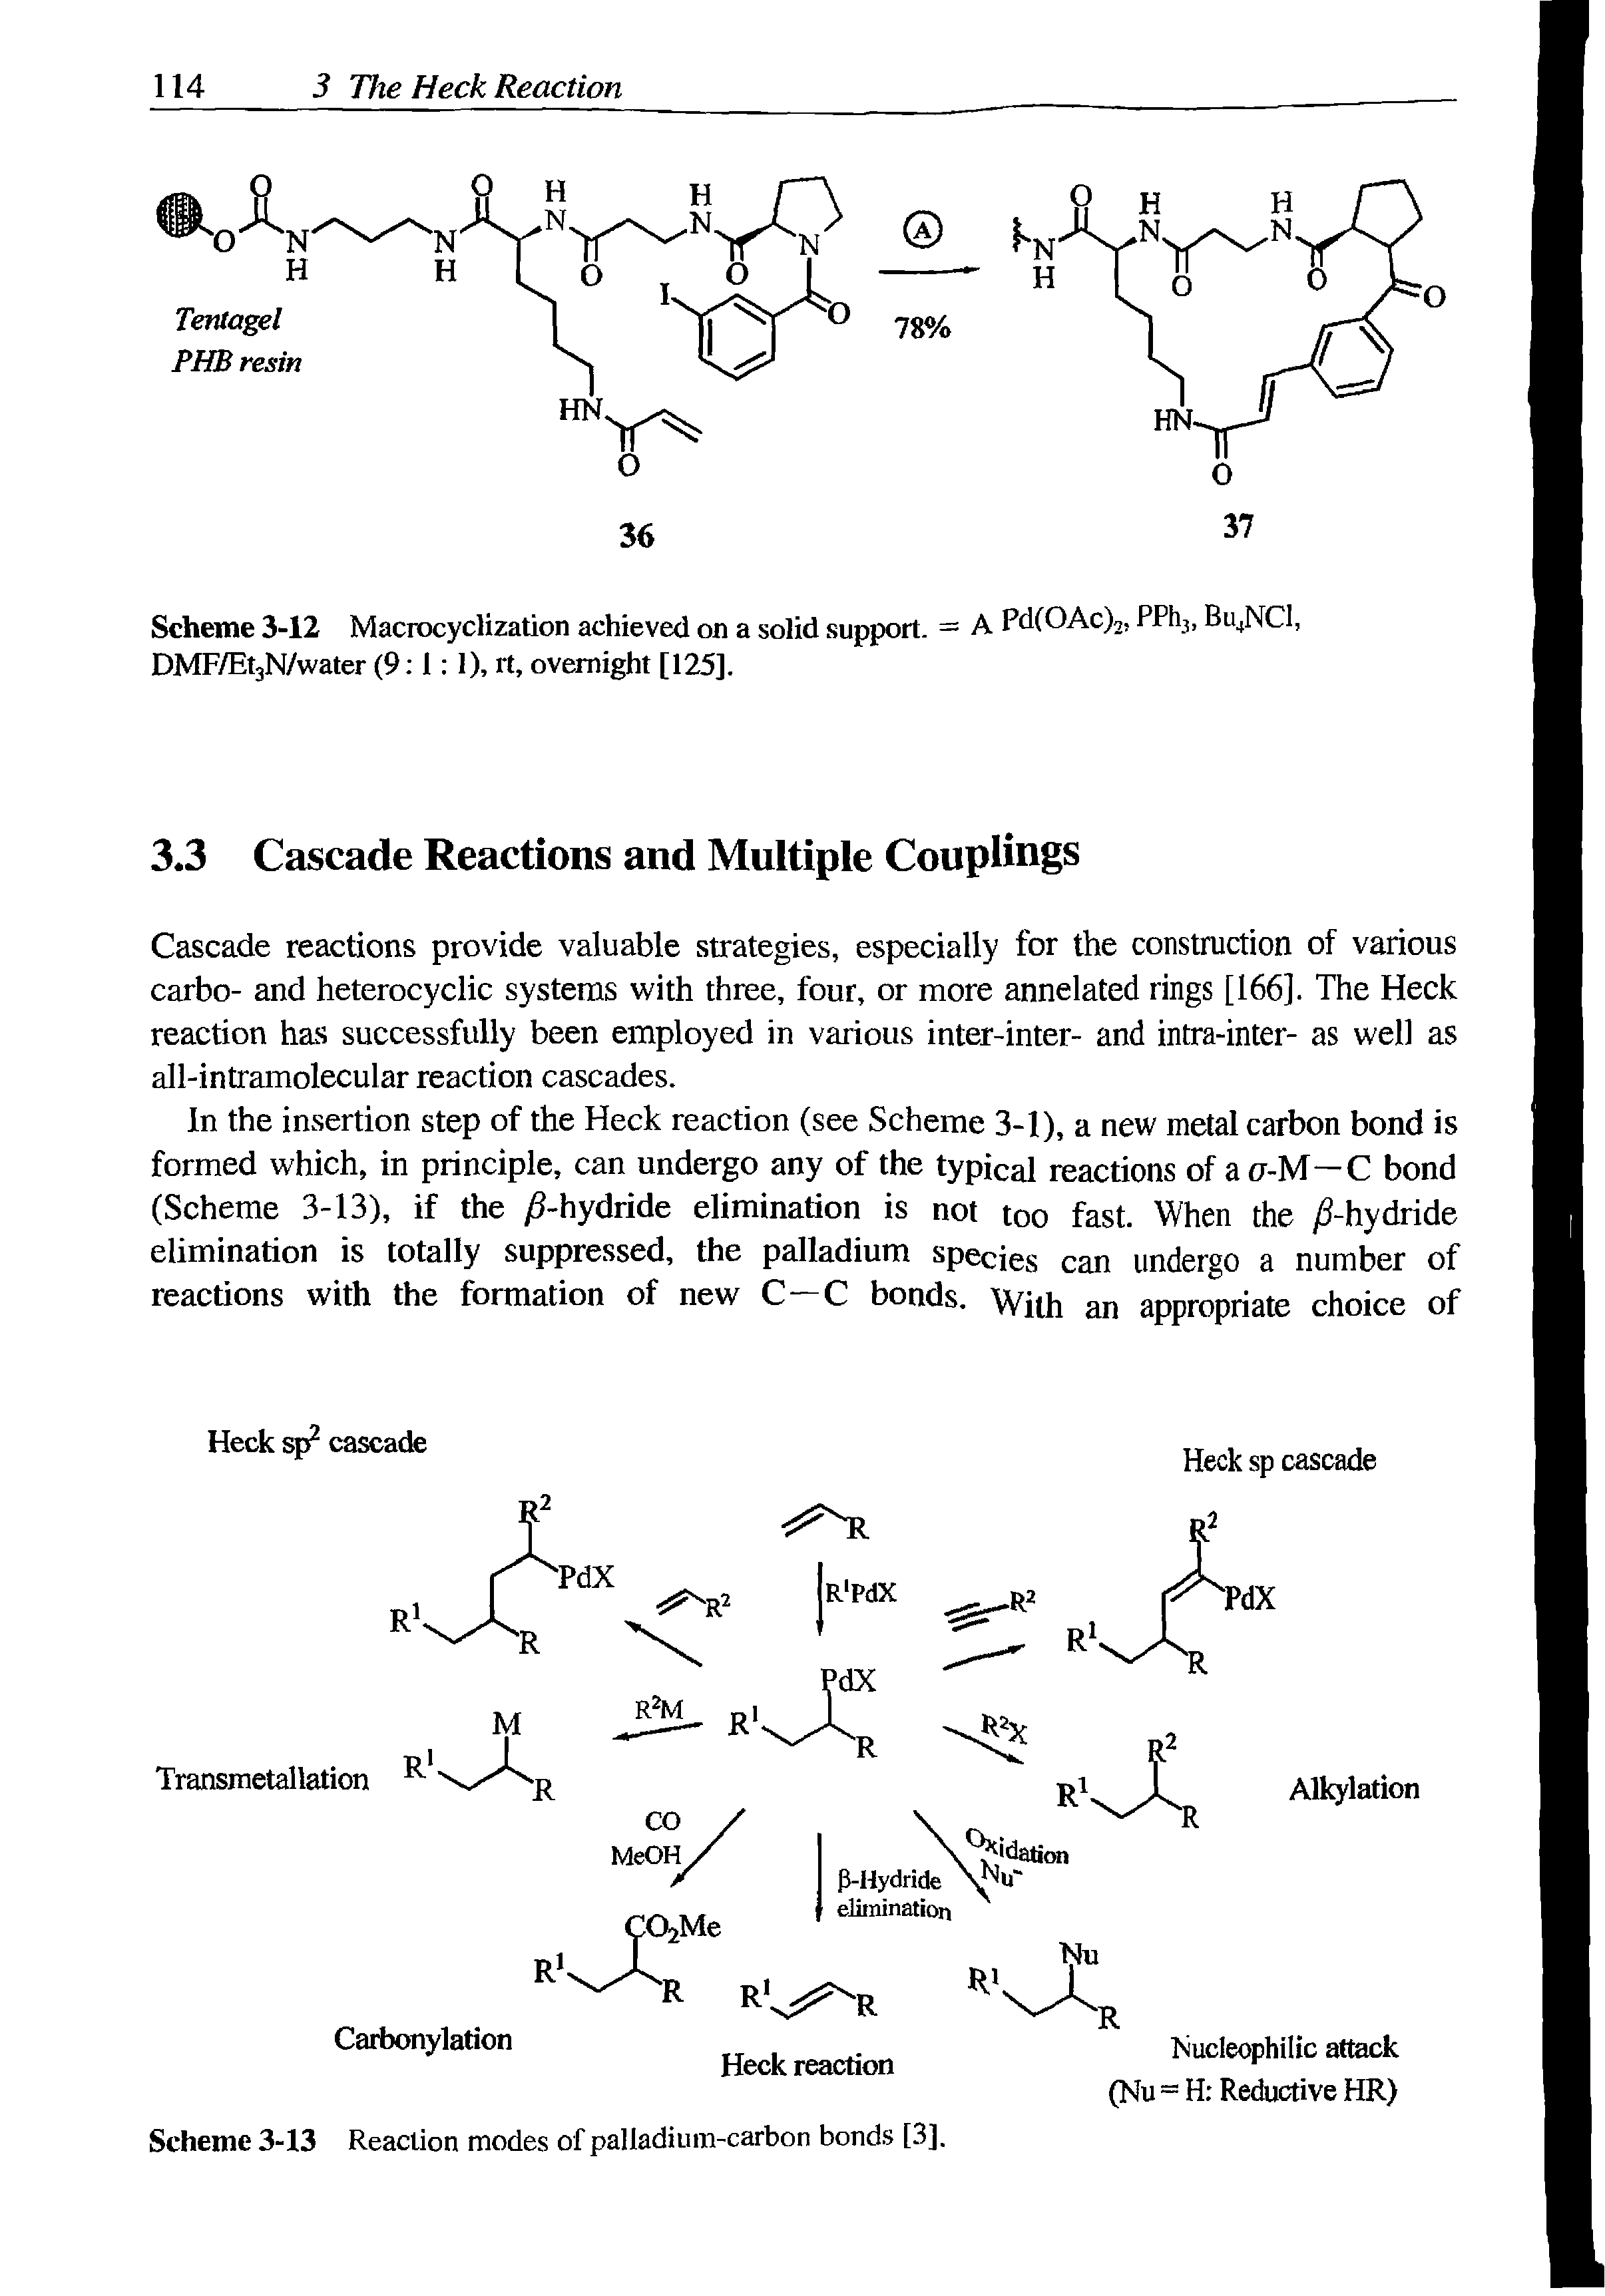 Scheme 3-12 Macrocyclization achieved on a solid support. = A PdCOAc), PPh, Bu NCl, DMF/EtjN/water (9 1 1), rt, overnight [125].